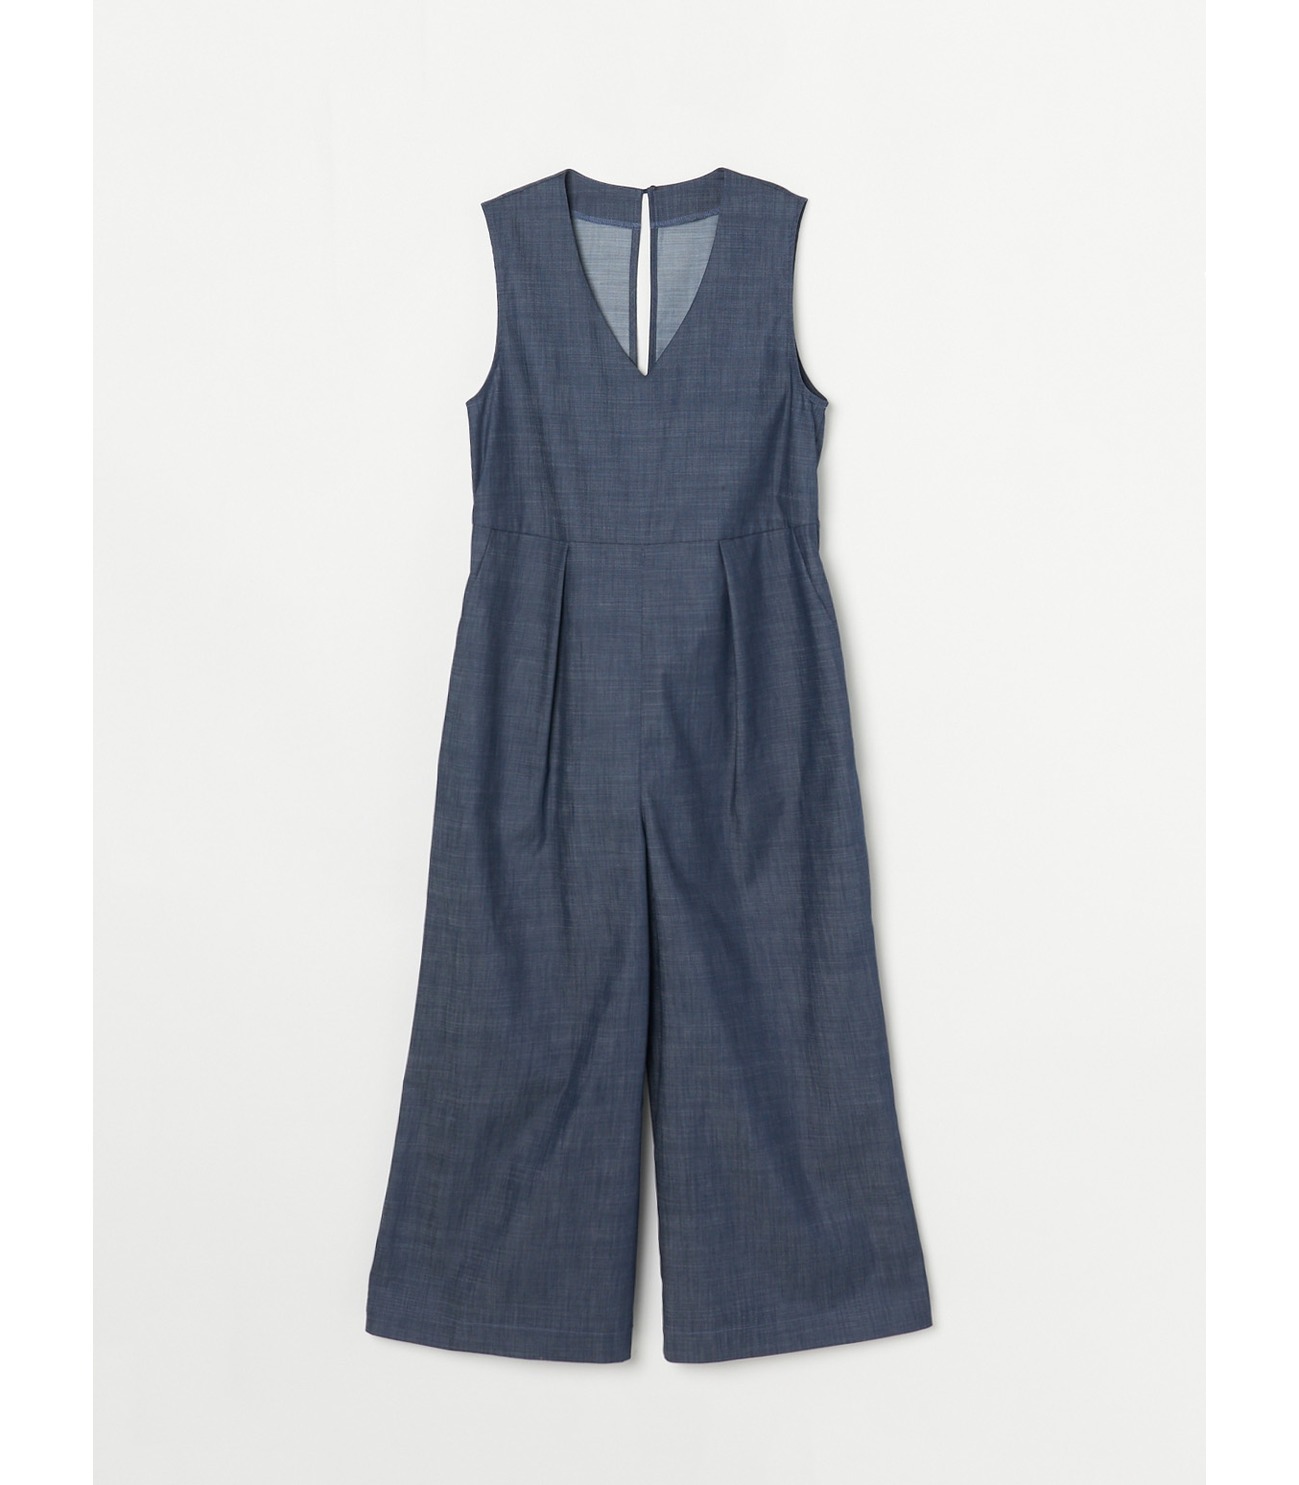 Dungaree all in one 詳細画像 navy 1